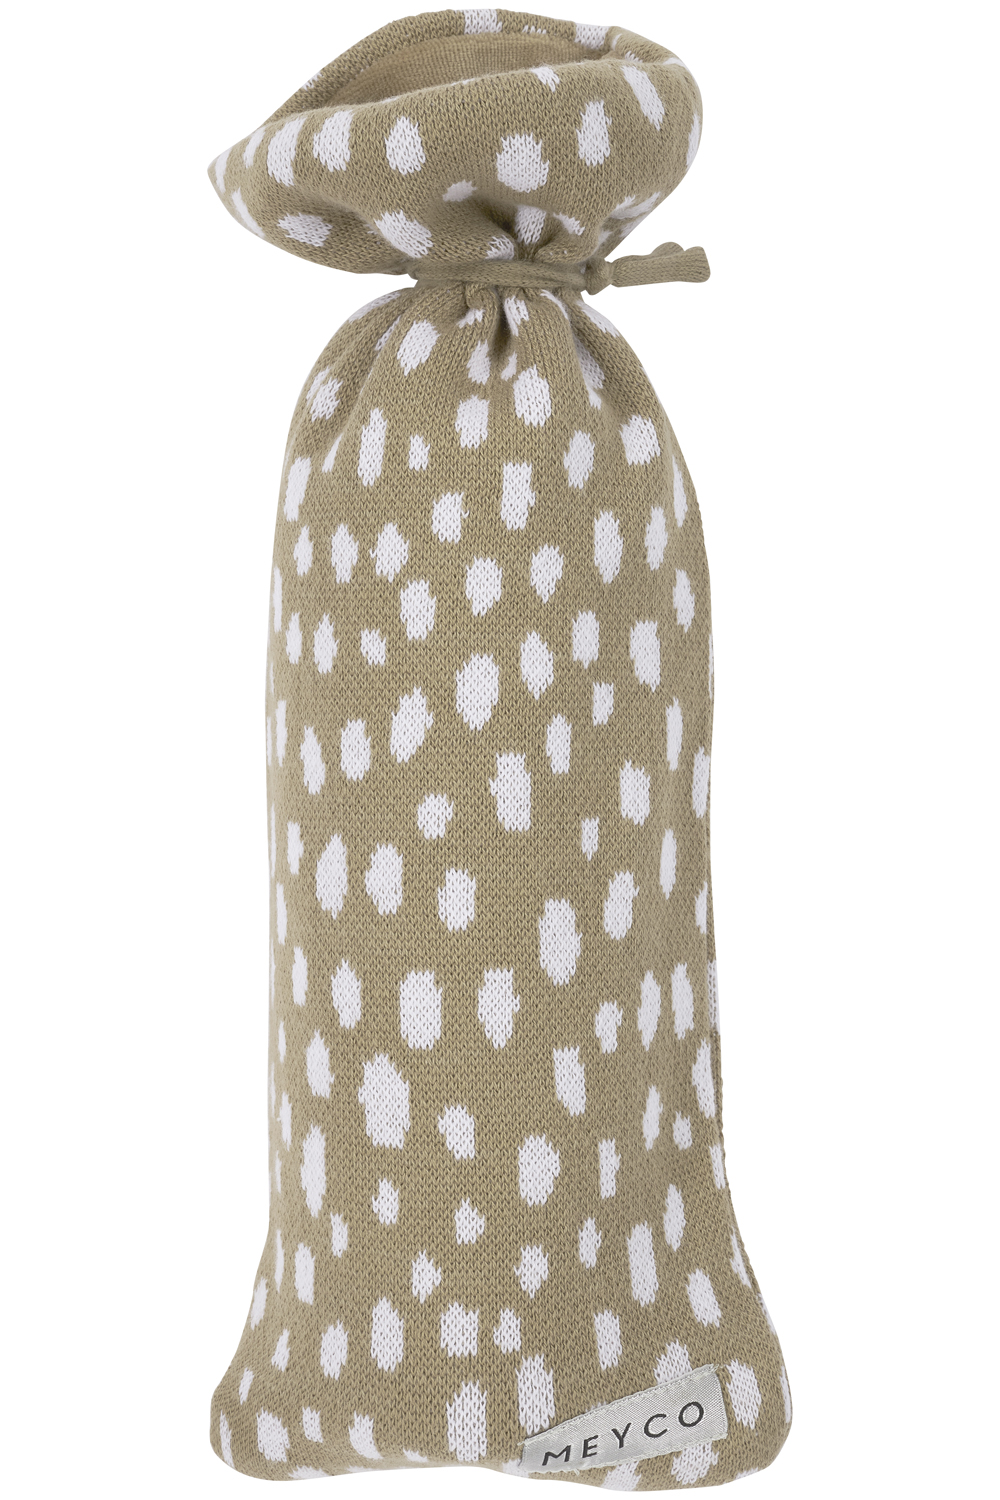 Hot Water Bottle Cover Cheetah - Taupe - 13xh35cm